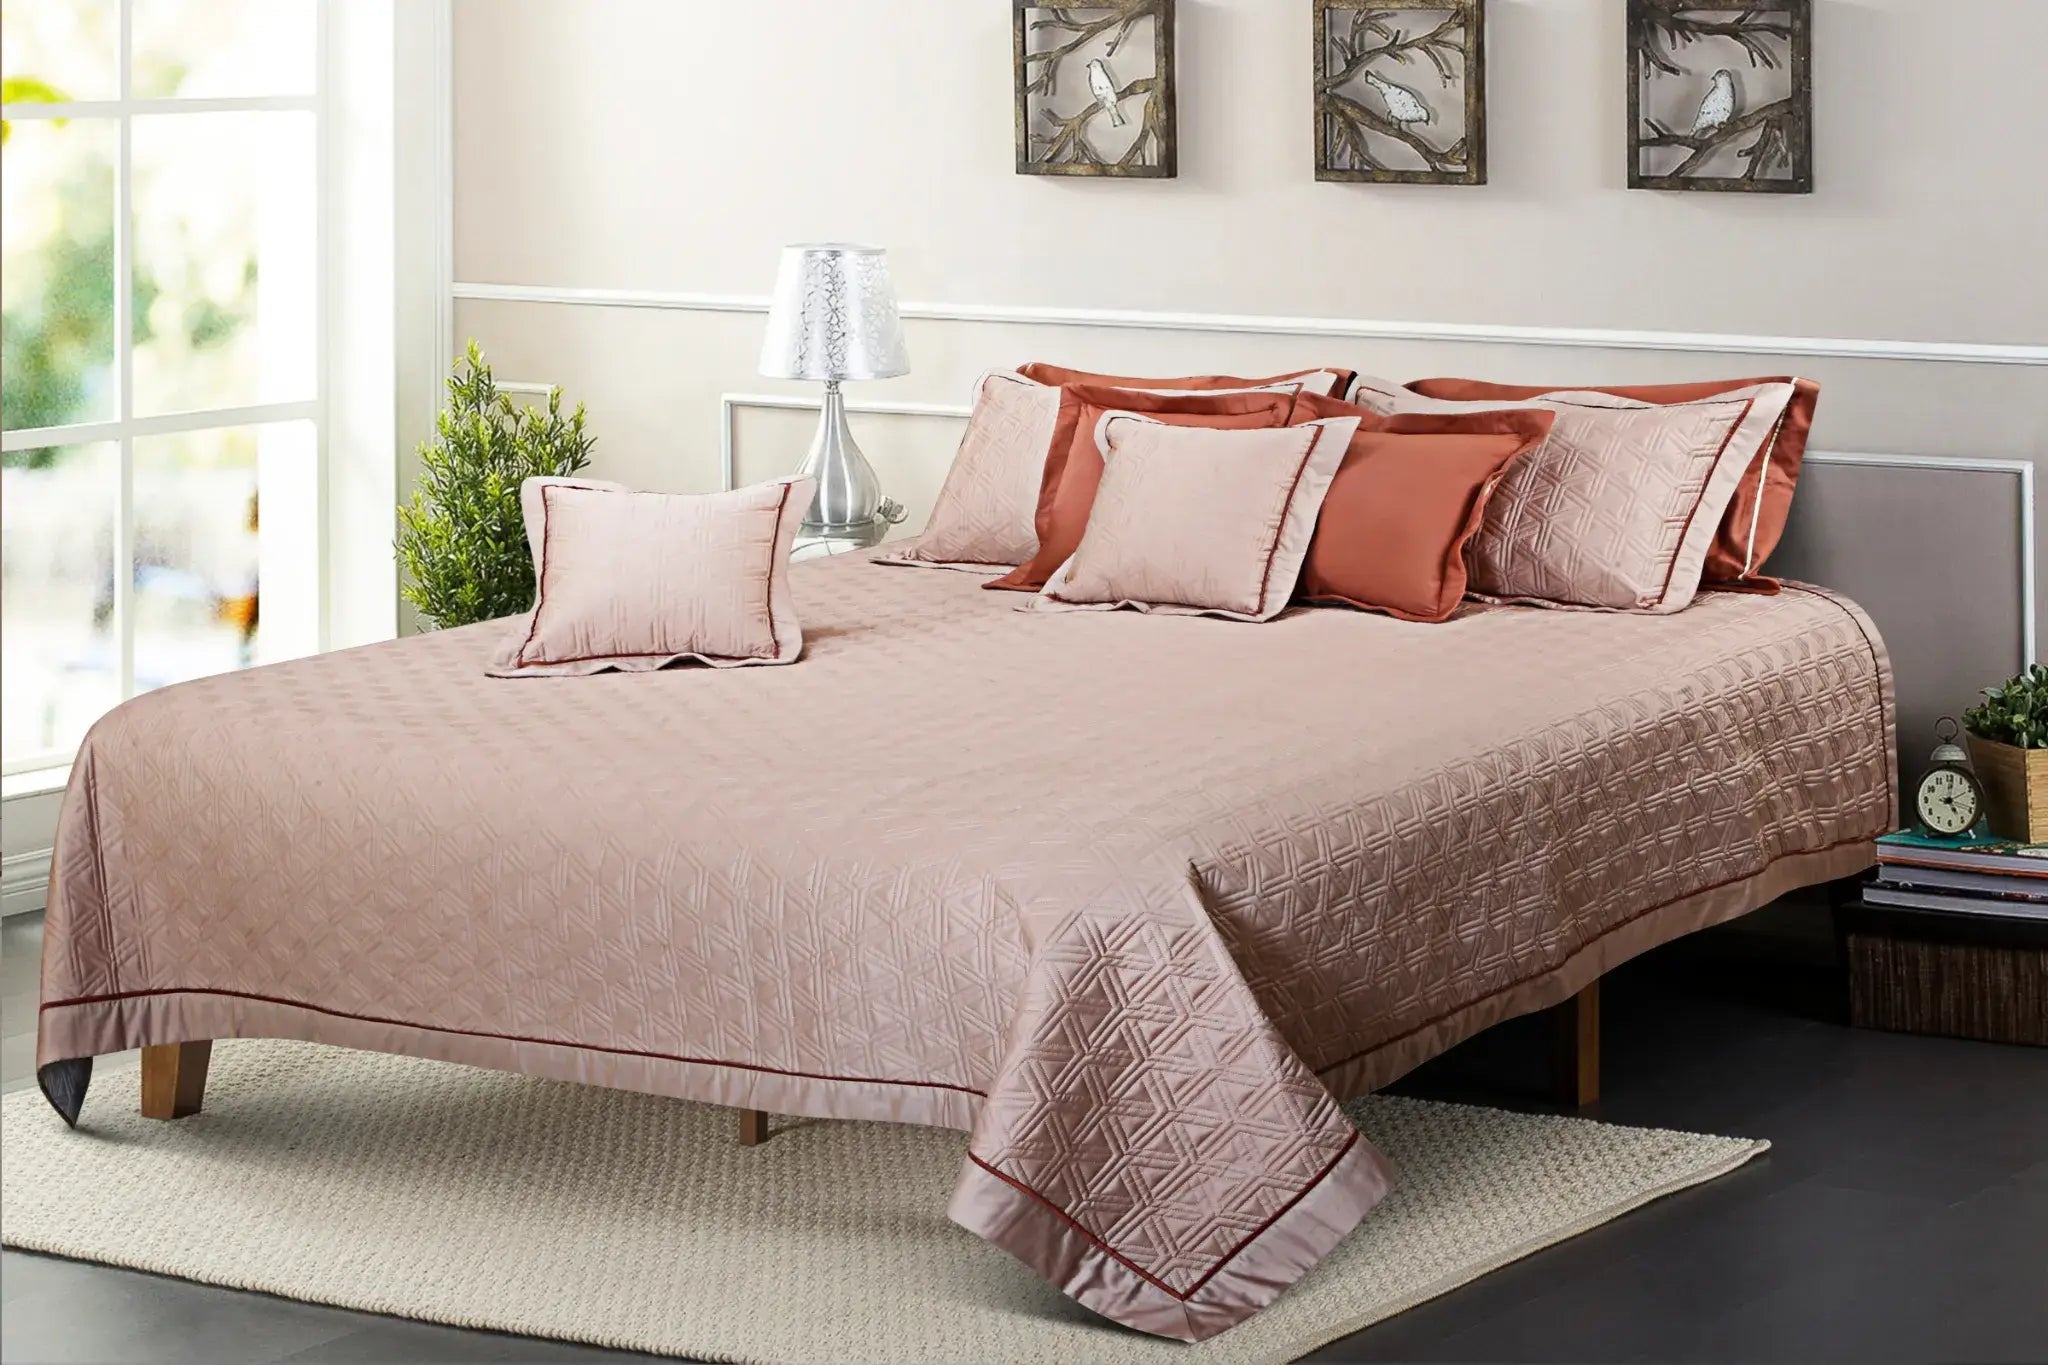 Malako Kairo 500 TC Almond Beige Solid King Size 100% Cotton Quilted Bed Cover Set - MALAKO